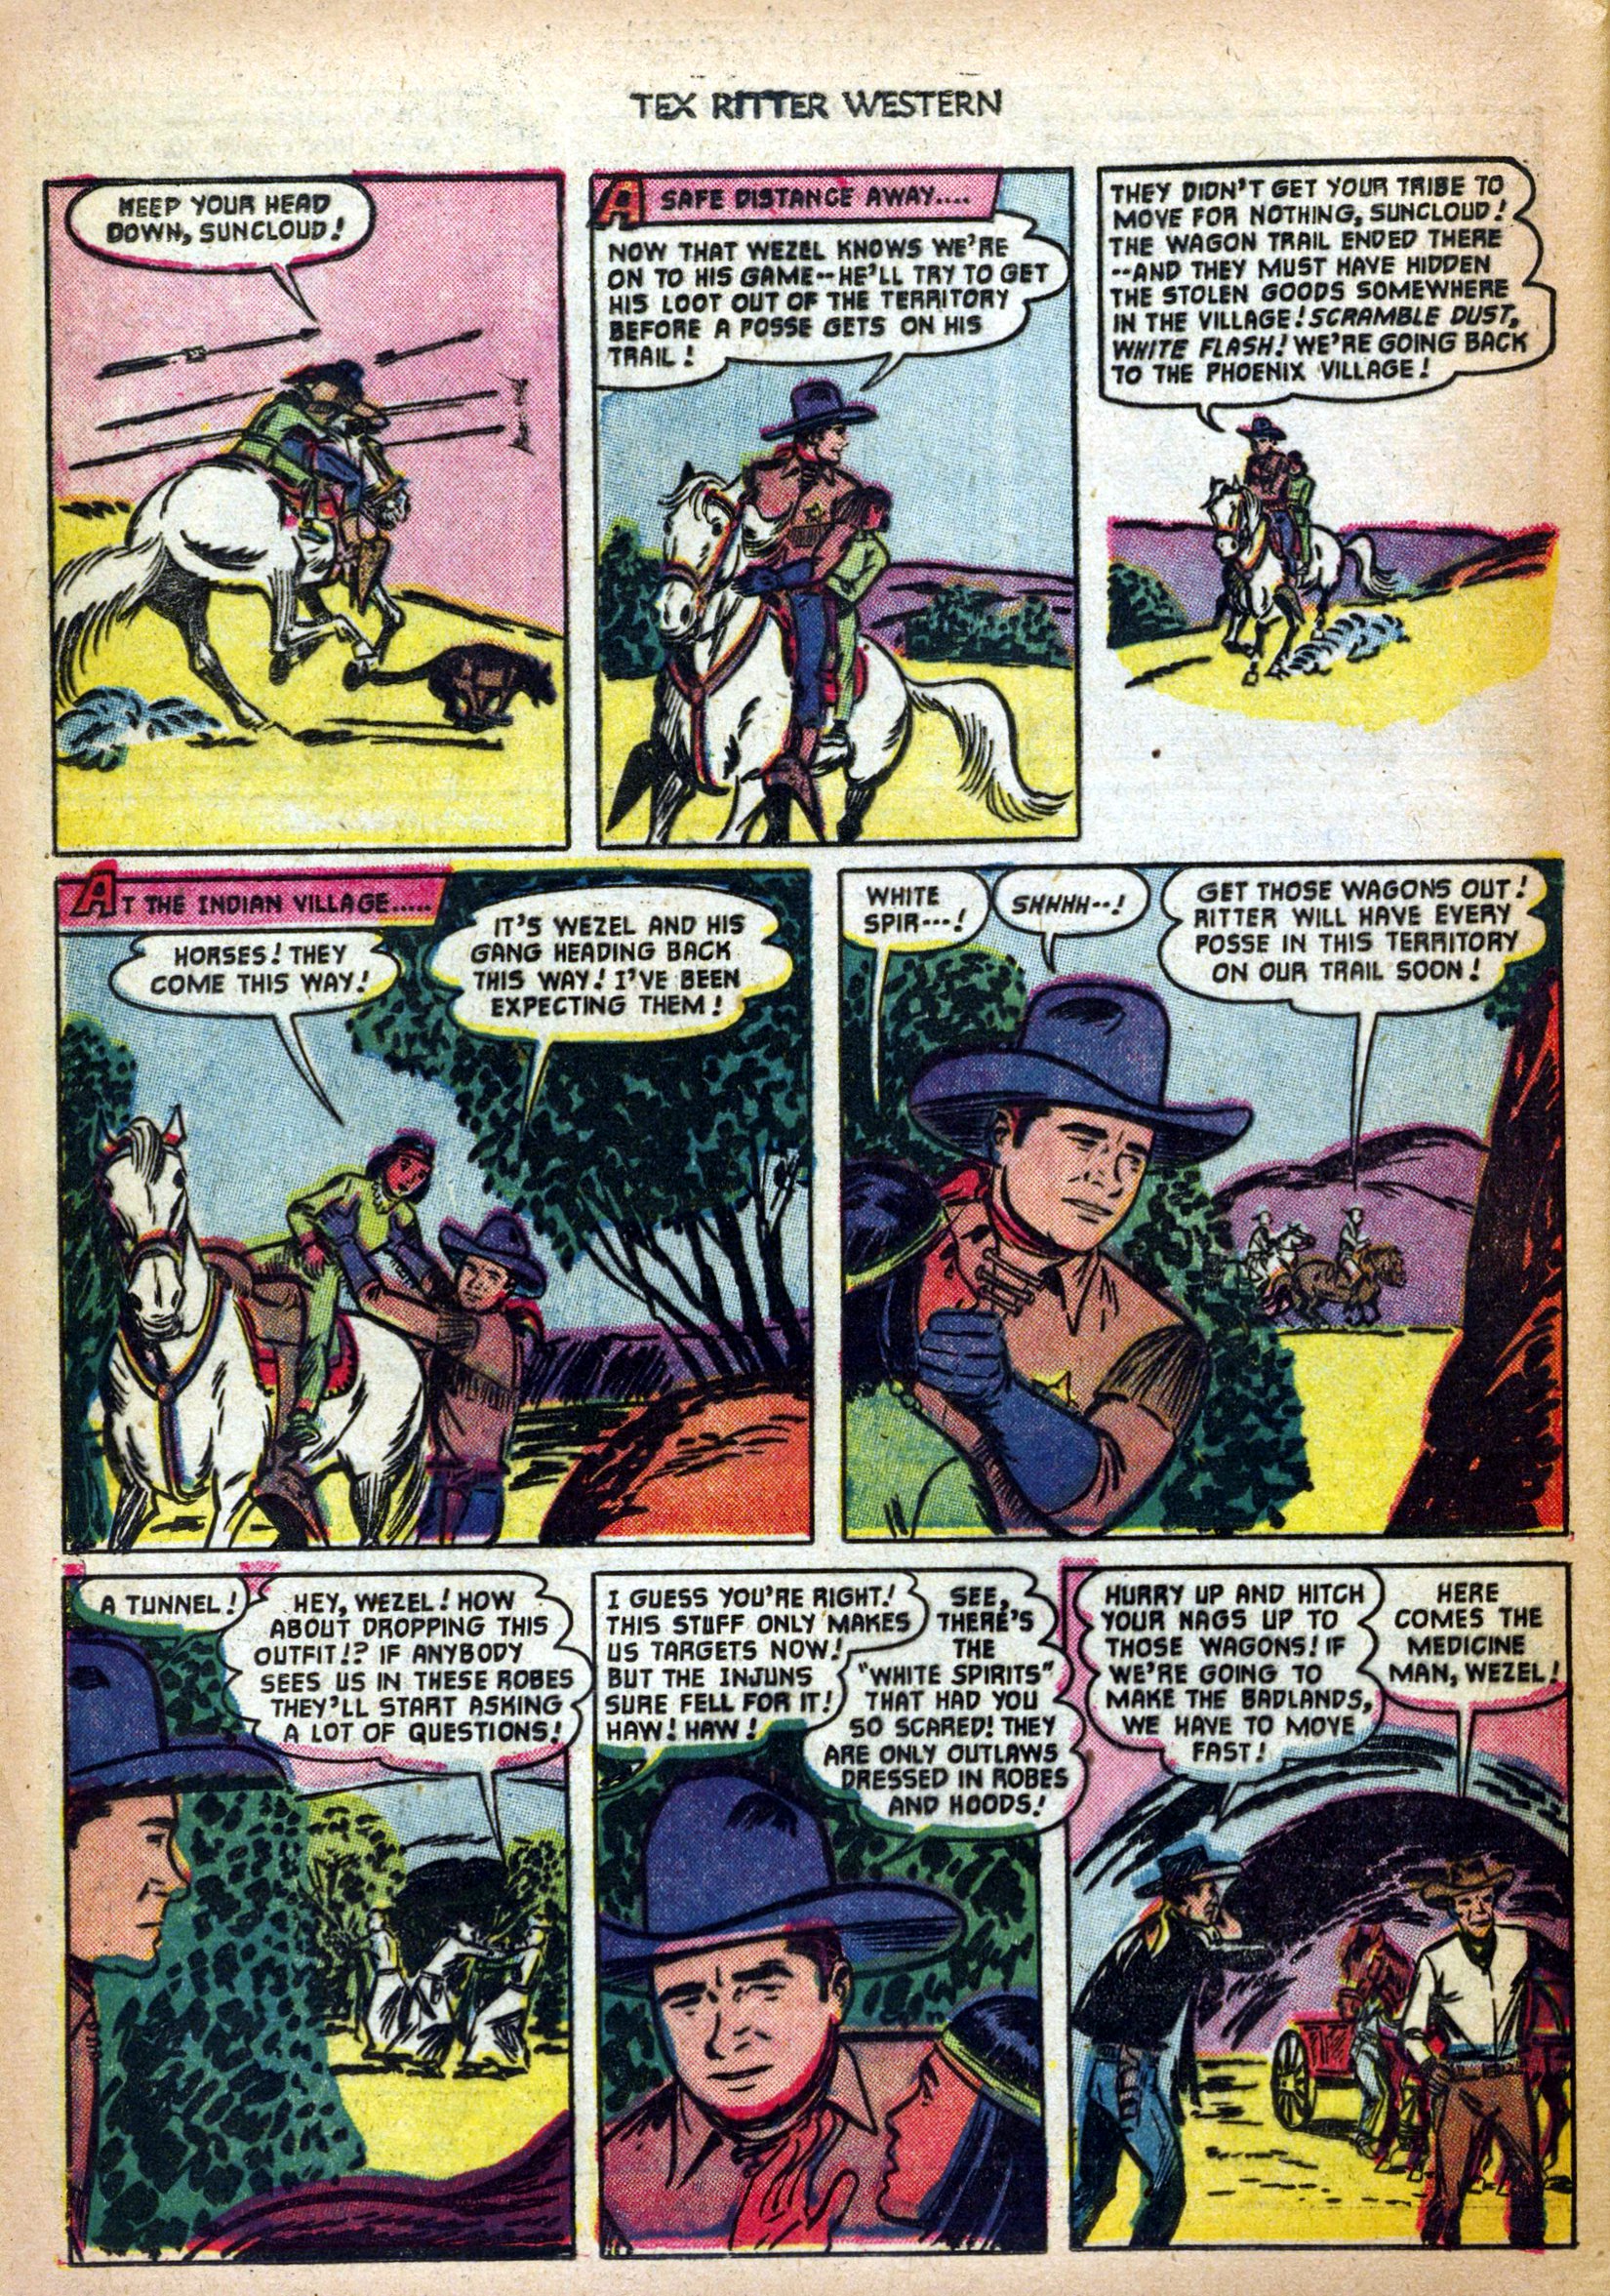 Read online Tex Ritter Western comic -  Issue #10 - 30